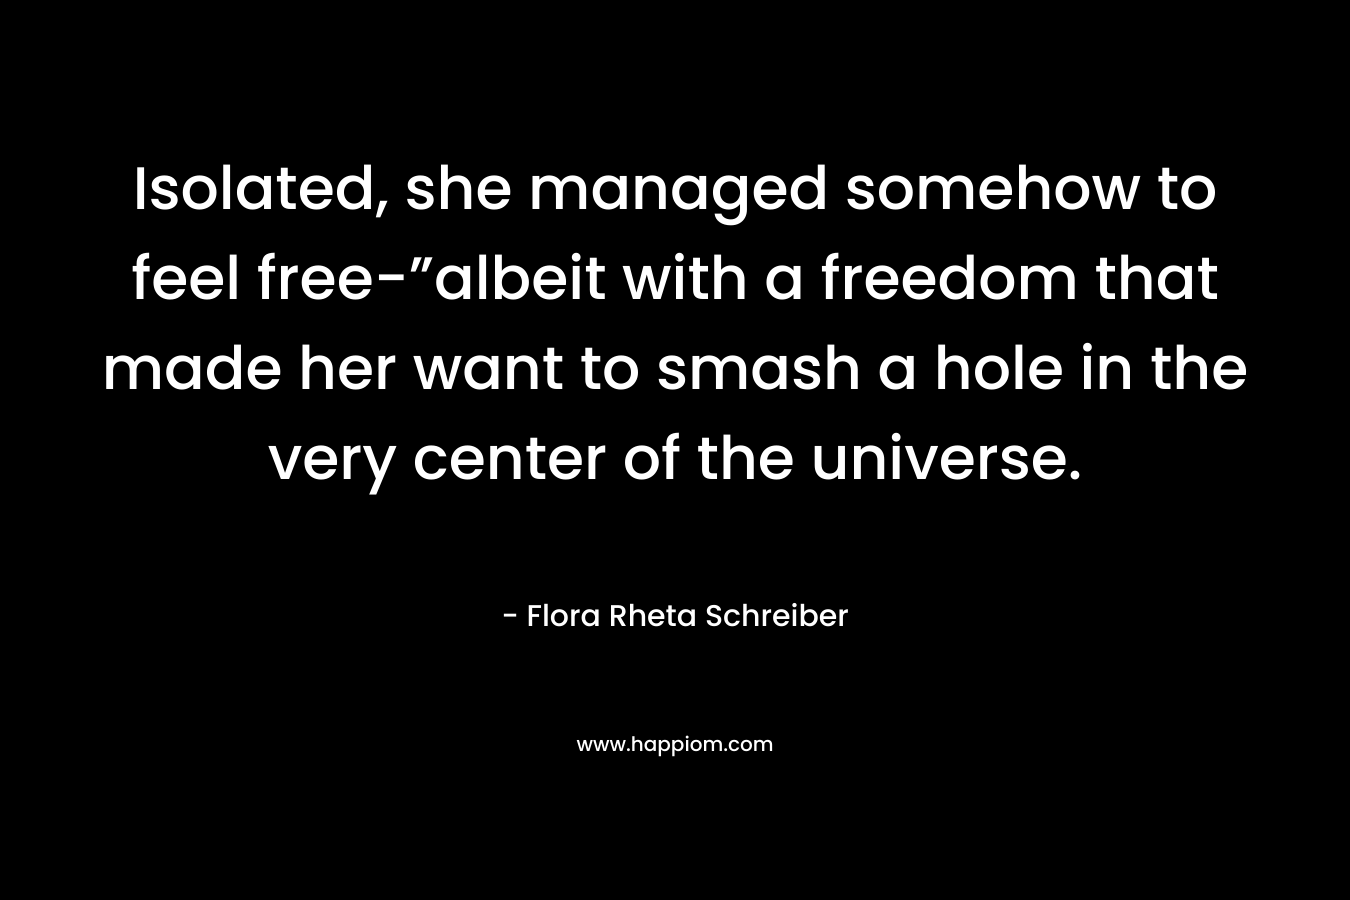 Isolated, she managed somehow to feel free-”albeit with a freedom that made her want to smash a hole in the very center of the universe. – Flora Rheta Schreiber